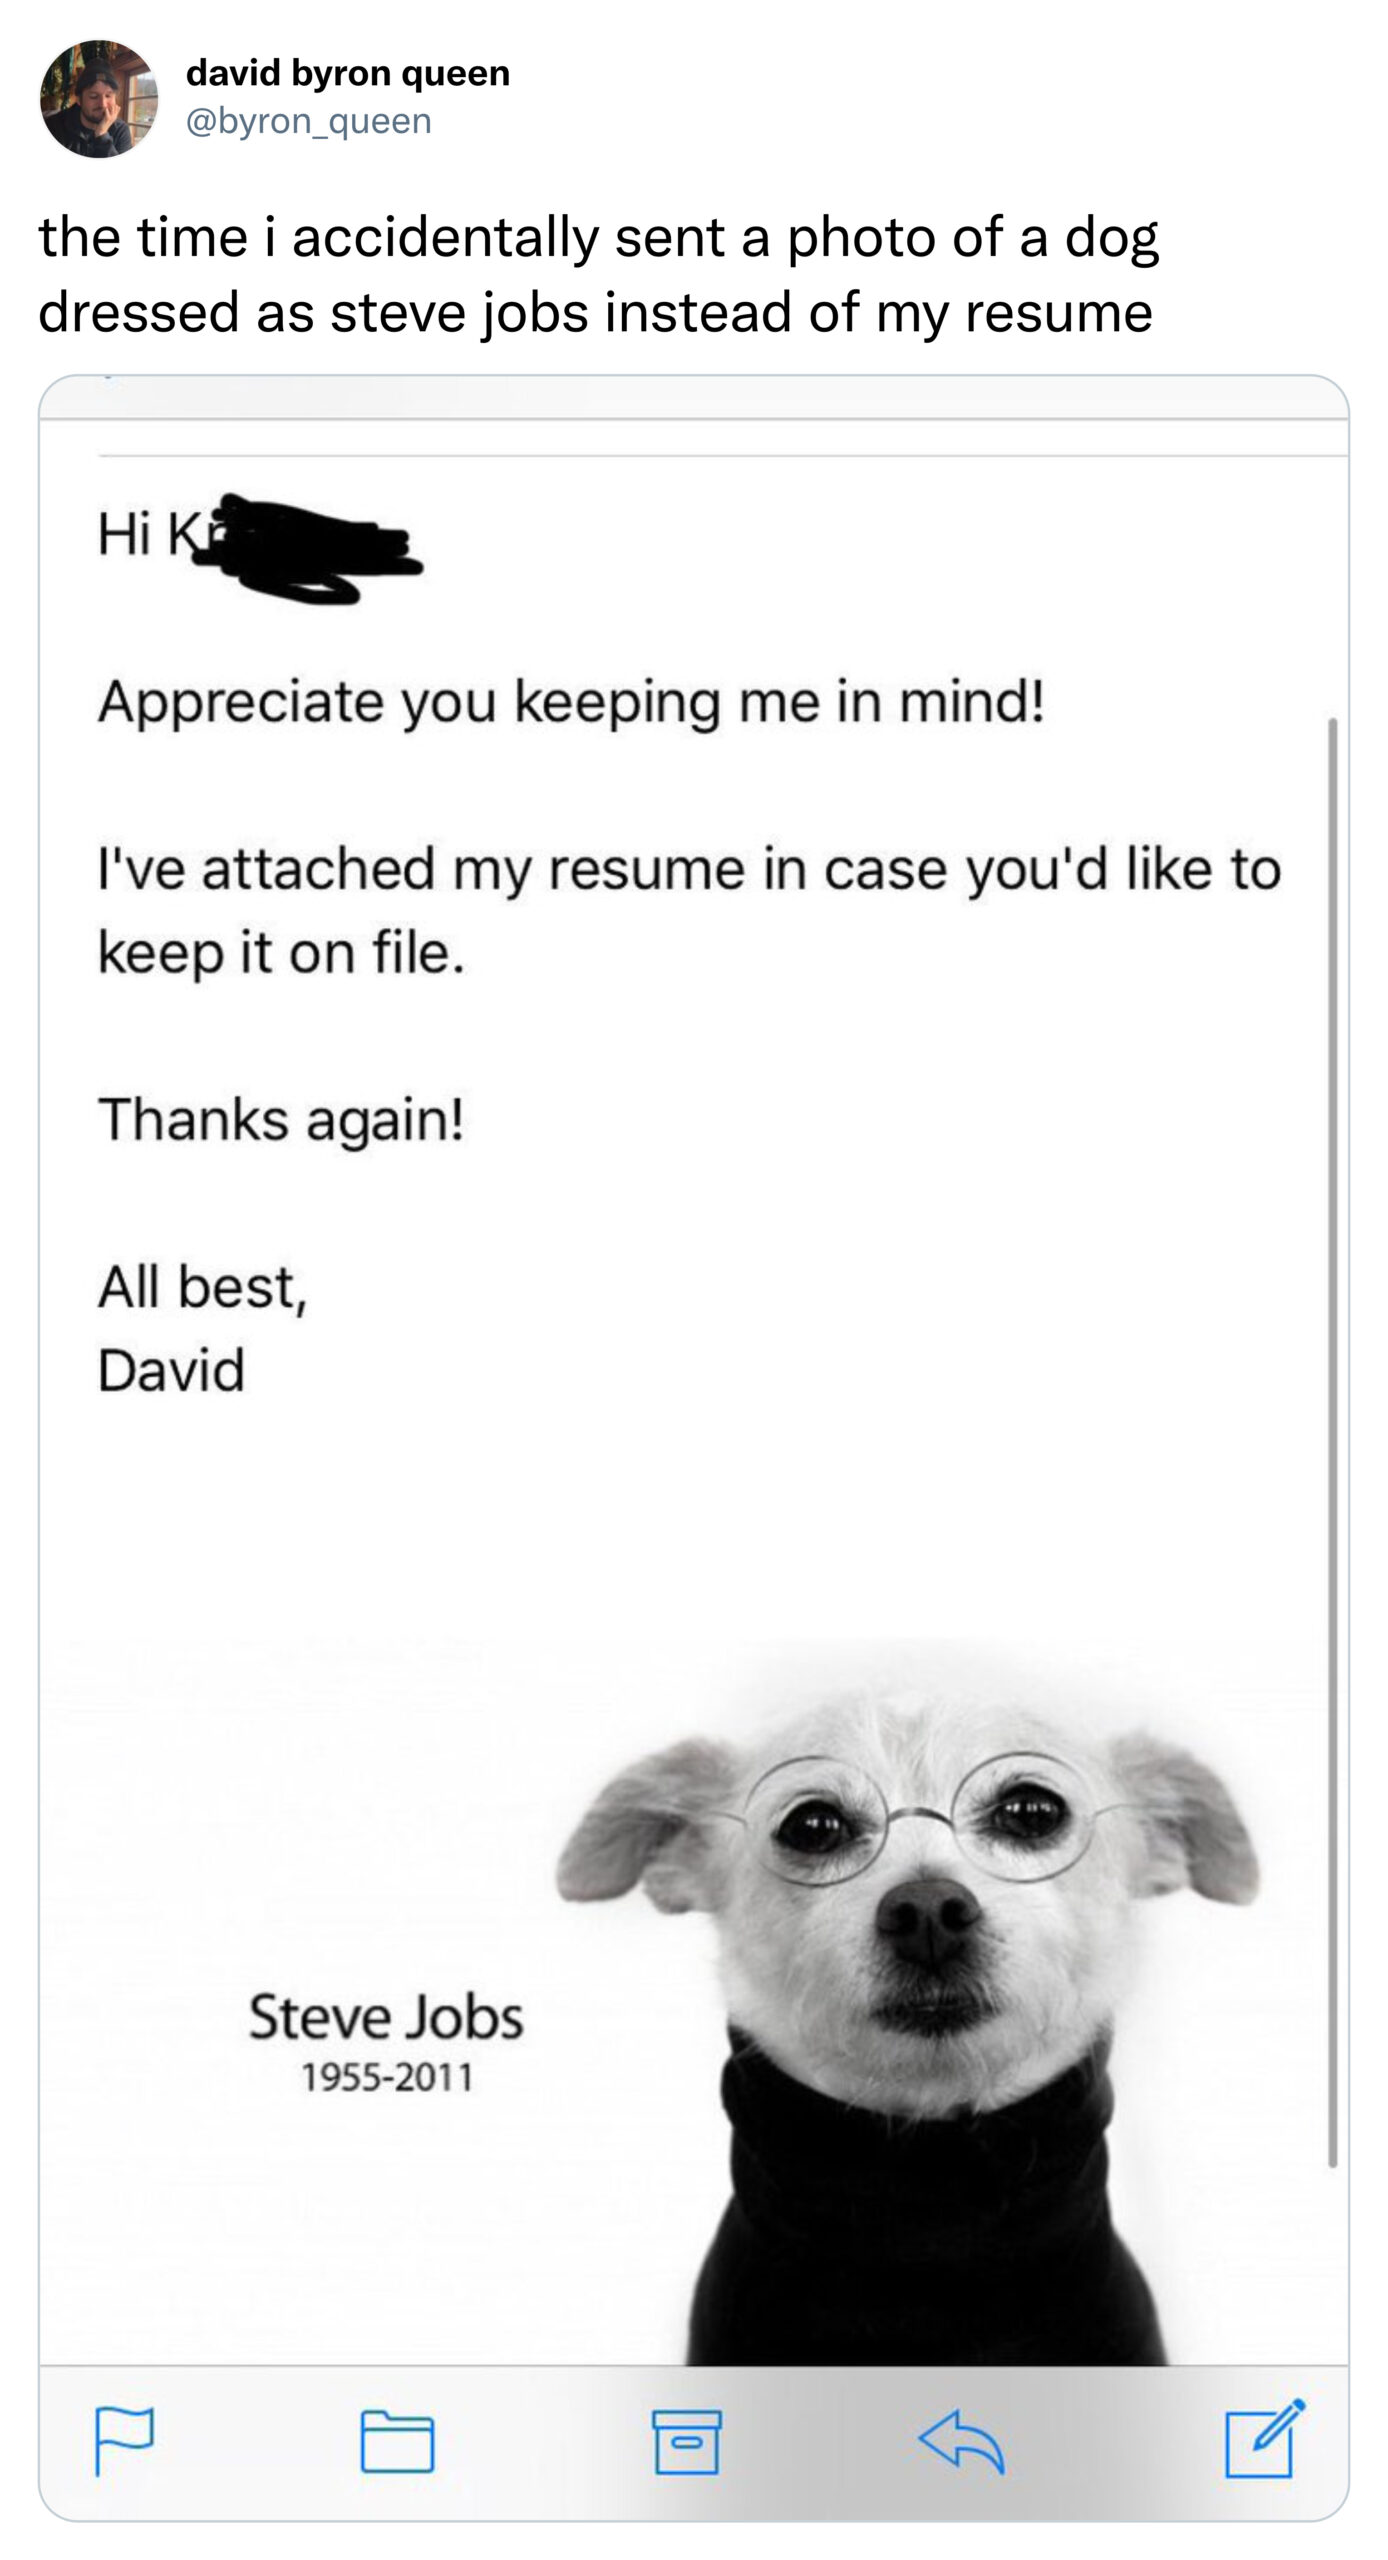 funny tweets - dog - david byron queen the time i accidentally sent a photo of a dog dressed as steve jobs instead of my resume Hi K Appreciate you keeping me in mind! I've attached my resume in case you'd to keep it on file. Thanks again! All best, David